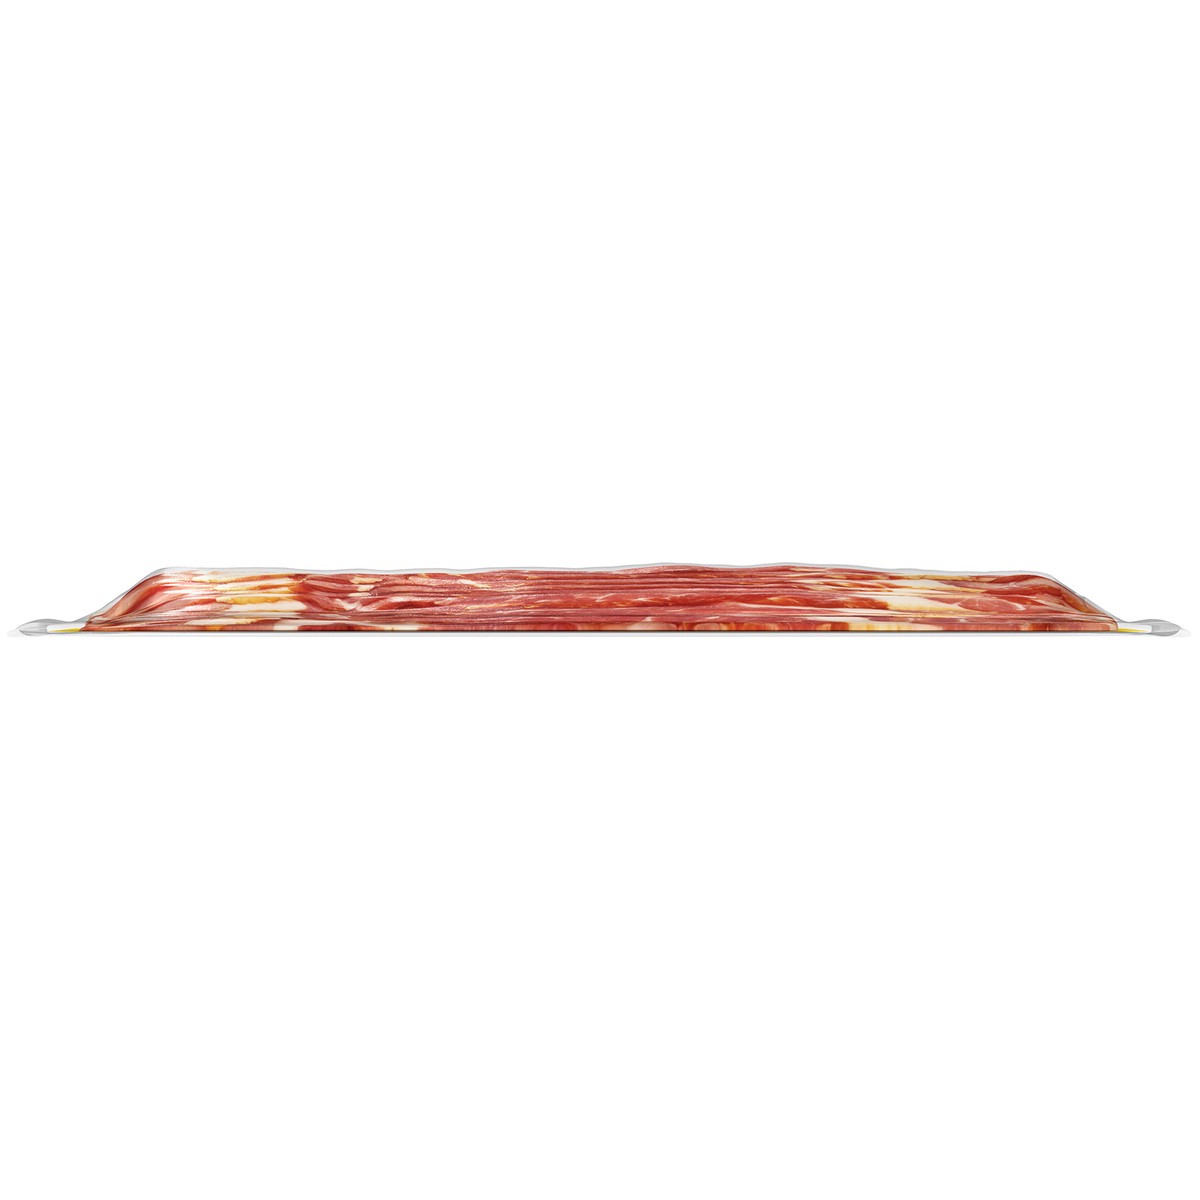 slide 2 of 15, Oscar Mayer Naturally Hardwood Smoked Thick Cut Bacon, 16 oz Pack, 11-13 slices, 16 oz